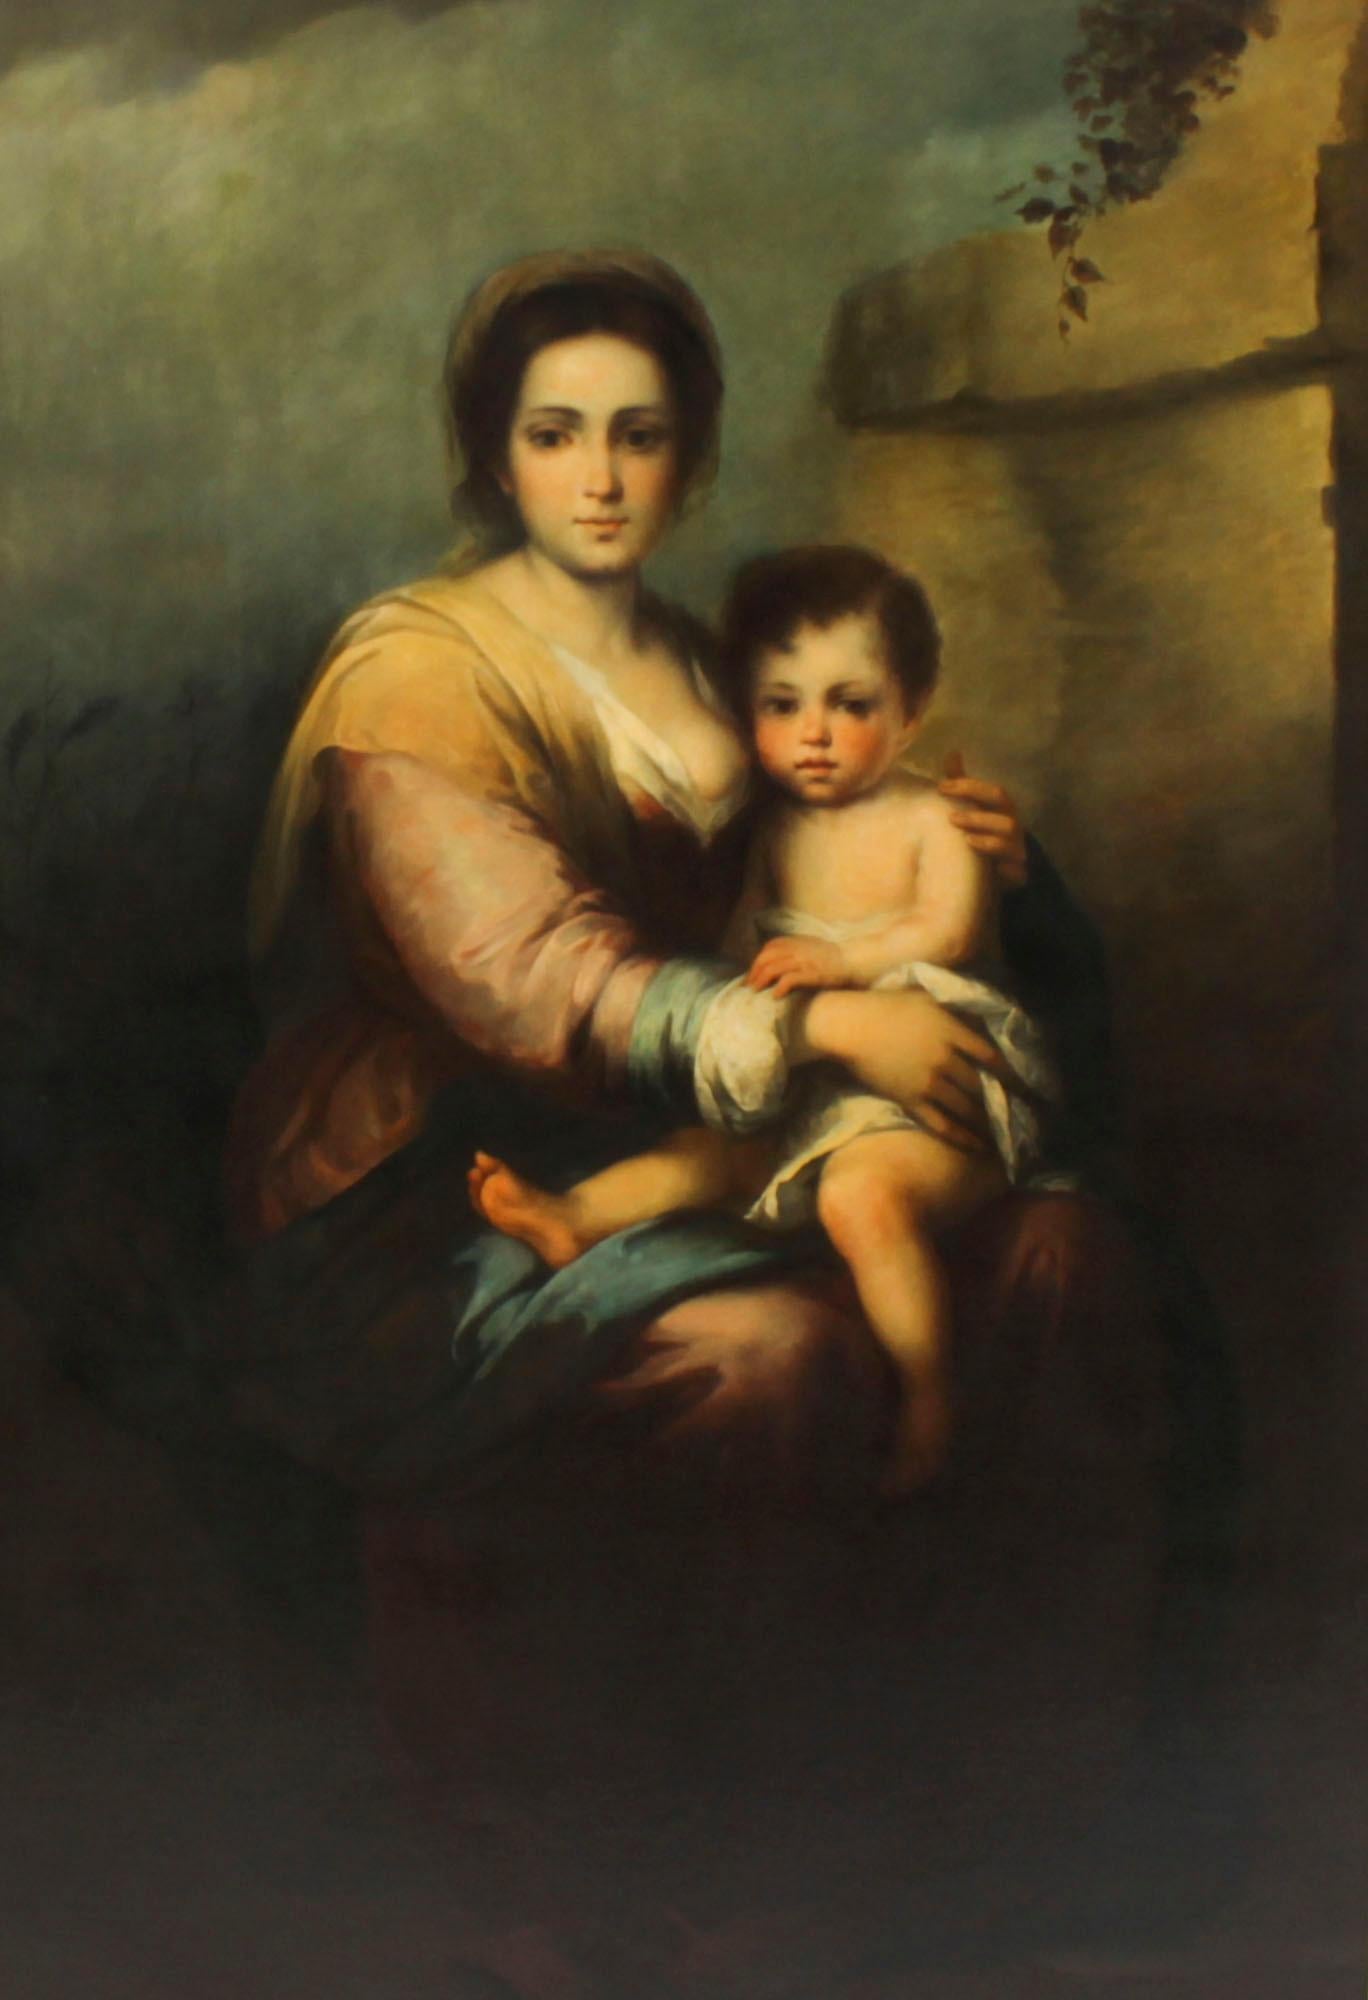 A large Spanish oil on canvas of Our Lady of The Rosary after Bartolomé  Esteban Murillo, early 19th century in date.

It features the Virgin Mary holding baby Jesus in her arms, she is dressed in a flowing traditional costume set against the